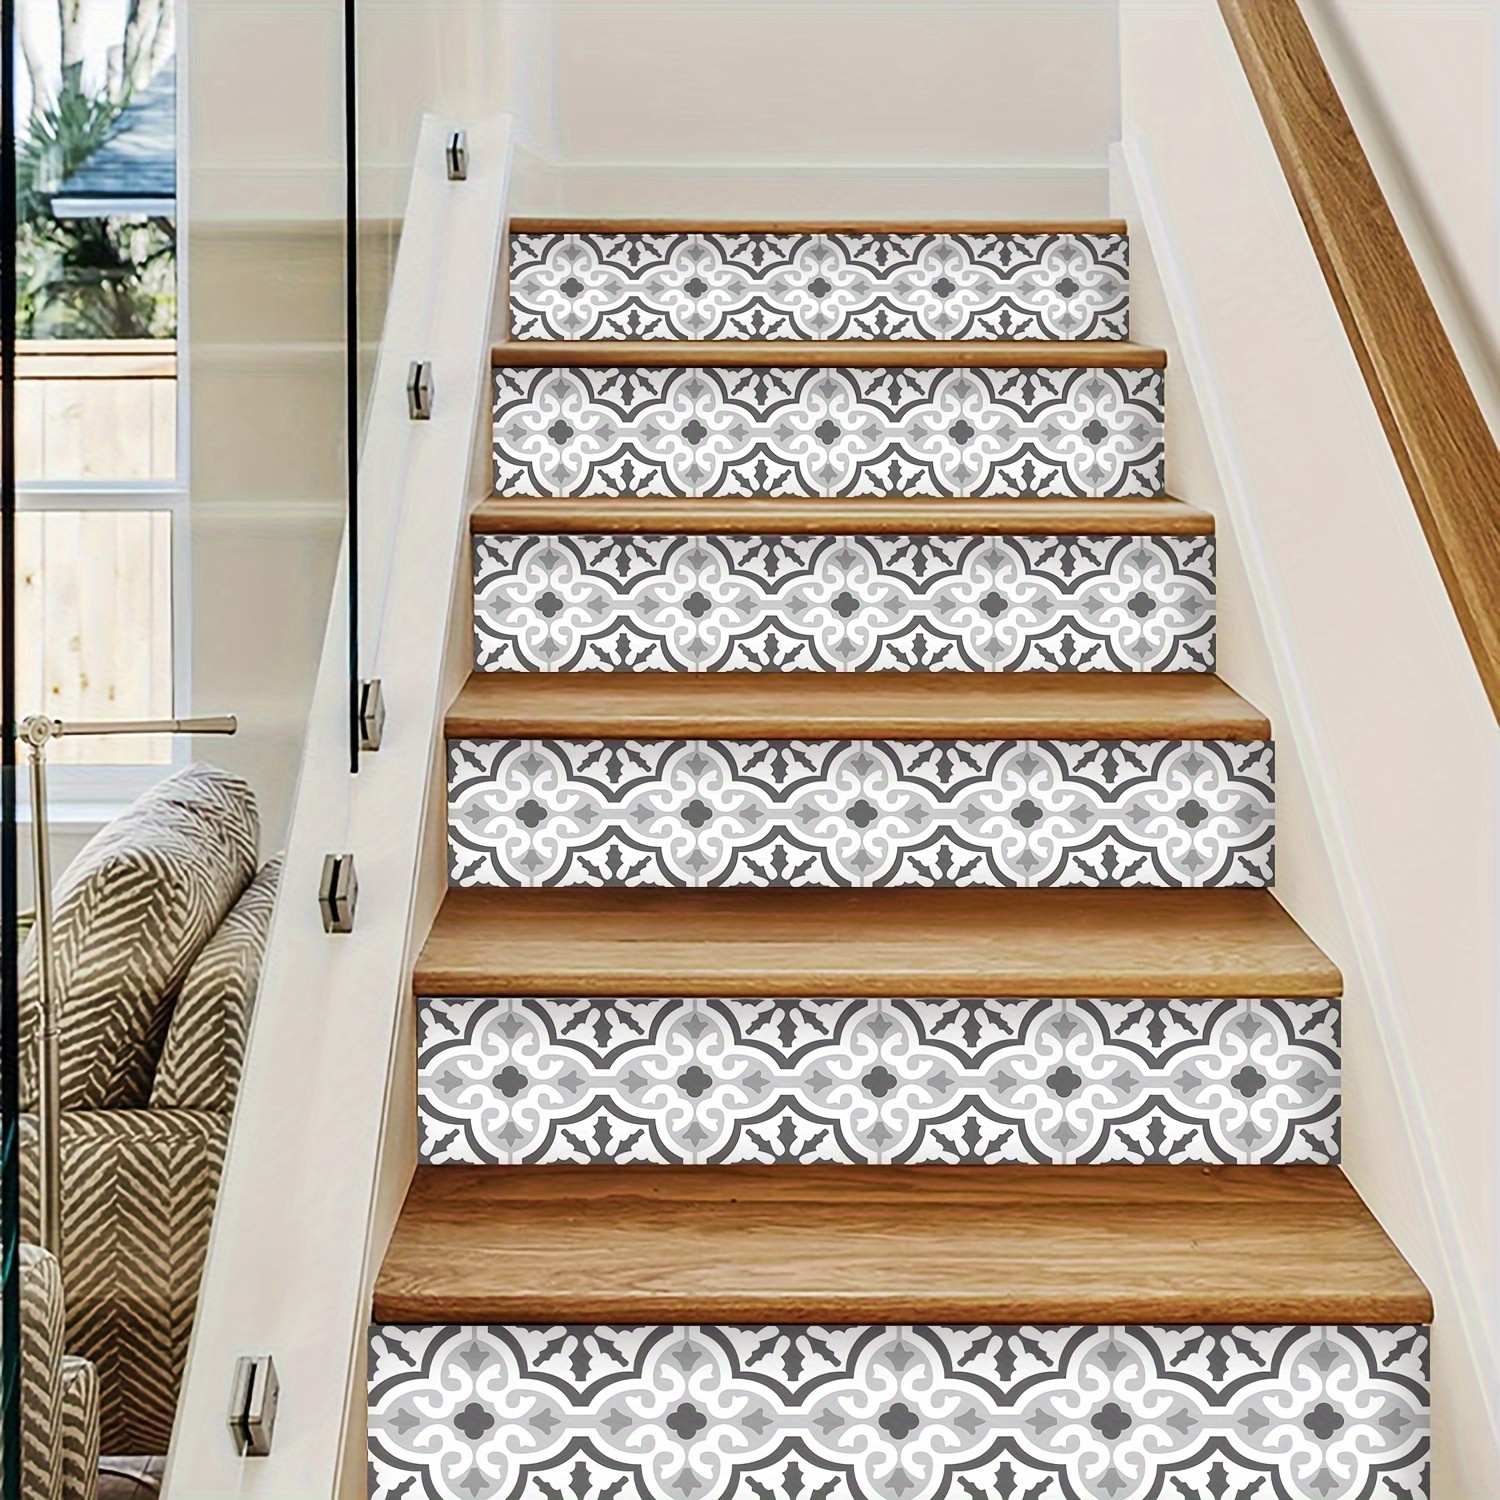 Strips Stair Risers Stickers, Peel And Stick Vinyl Staircase Sticker Decals  Decor For Stair Steps, 100.0cmx18.01cm, Home Decor